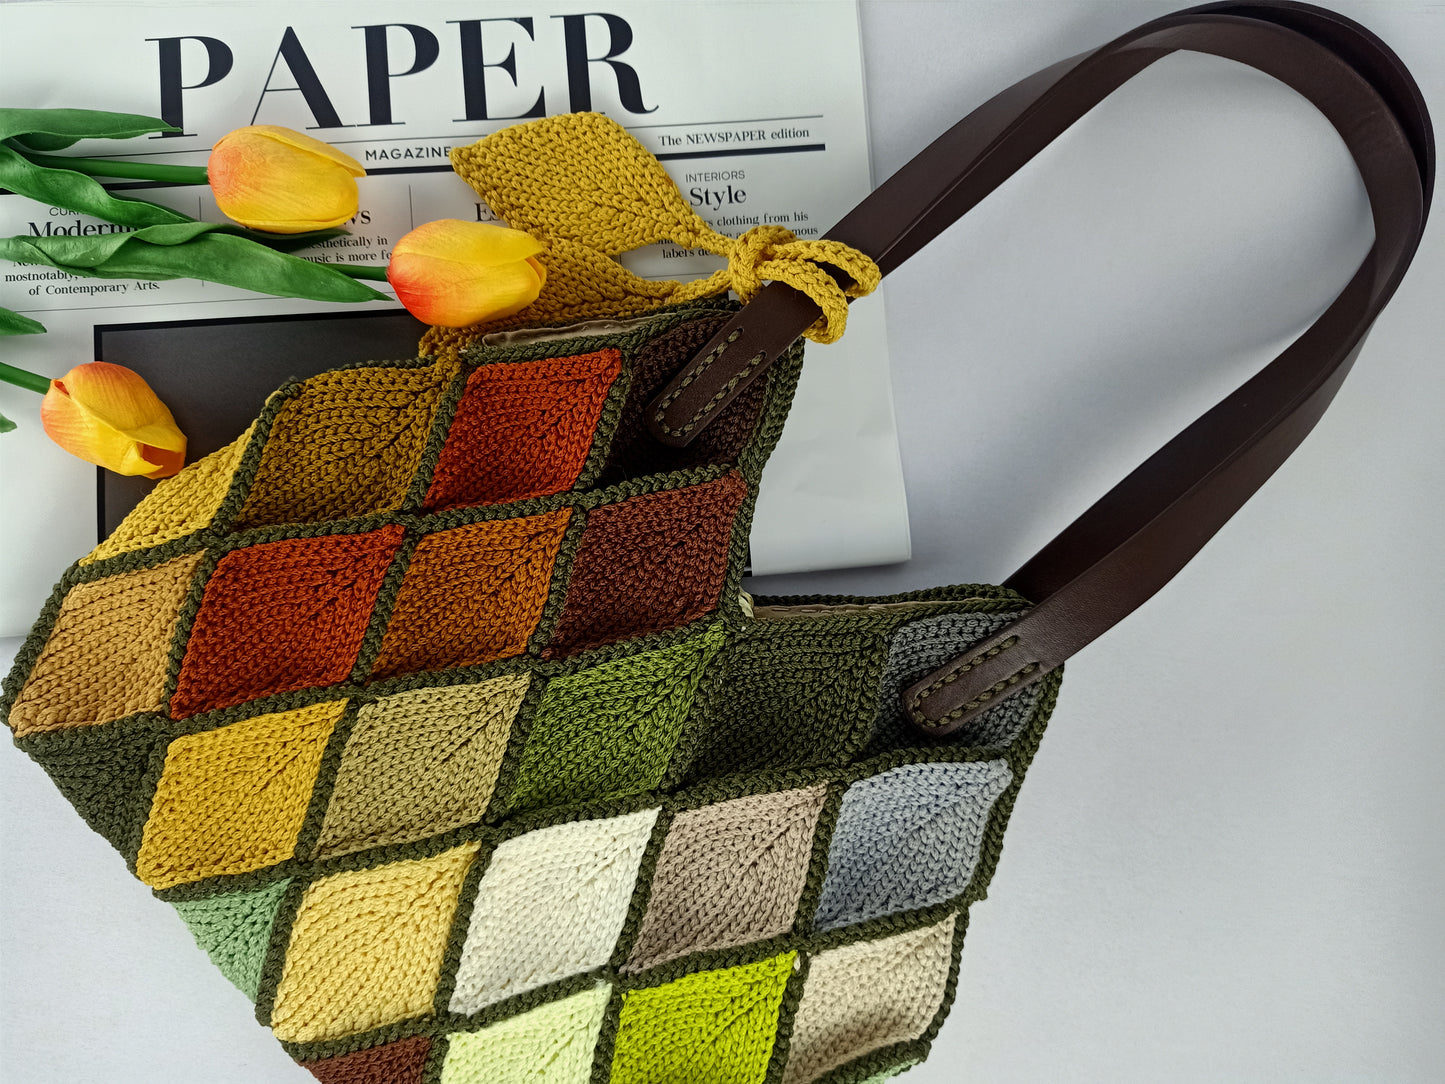 Autumn leaves bag, multicolor crochet bag with leather strap, black friday sale off